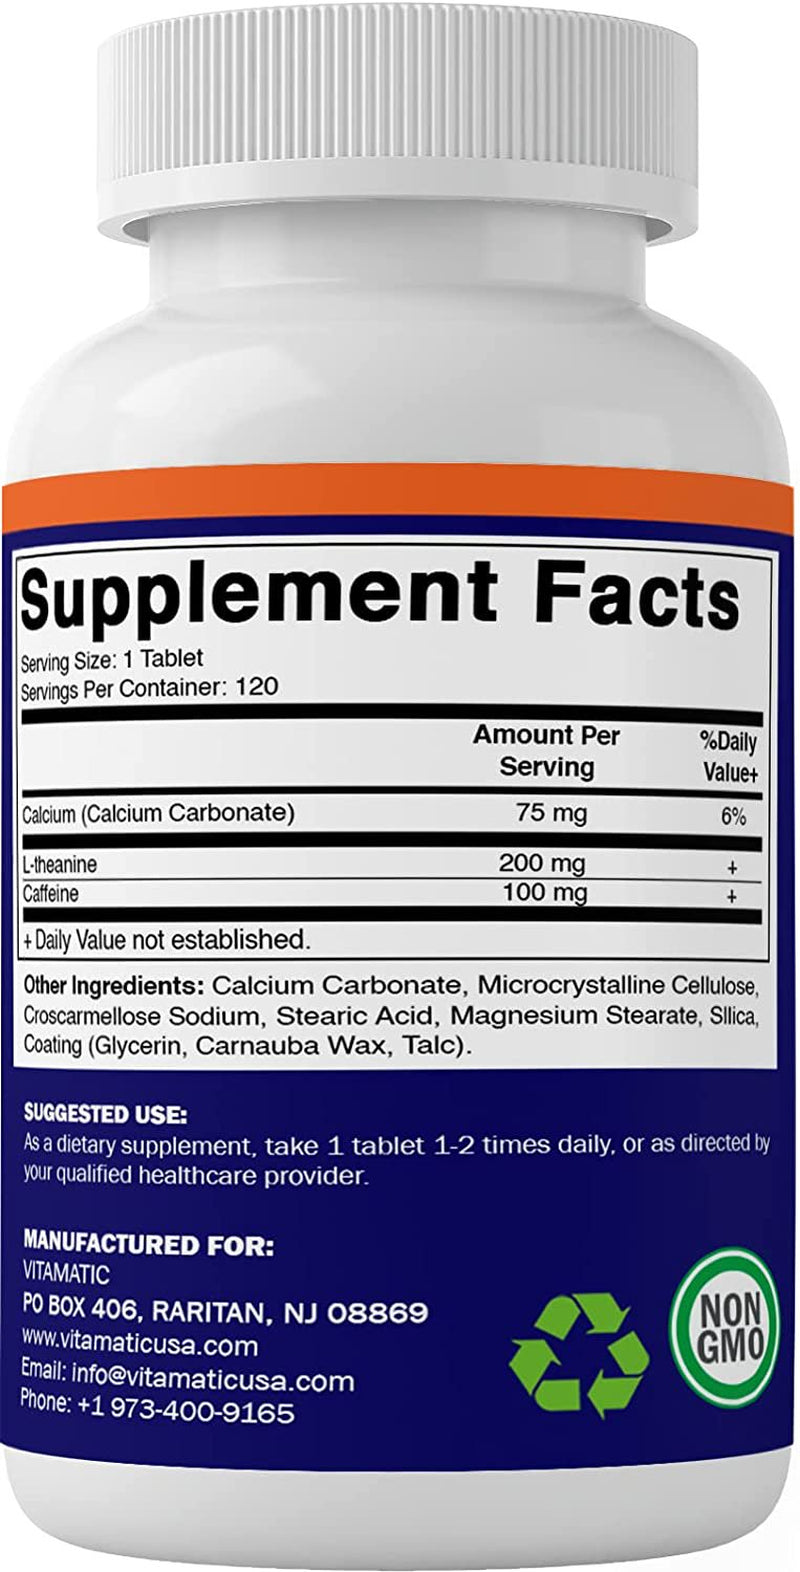 2 Packs Vitamatic Caffeine Pills with L-Theanine - 300 Mg per Tablet - 120 Vegetarian Tablets - Nootropic Supplement for Focused Energy (Total 240 Tablets)